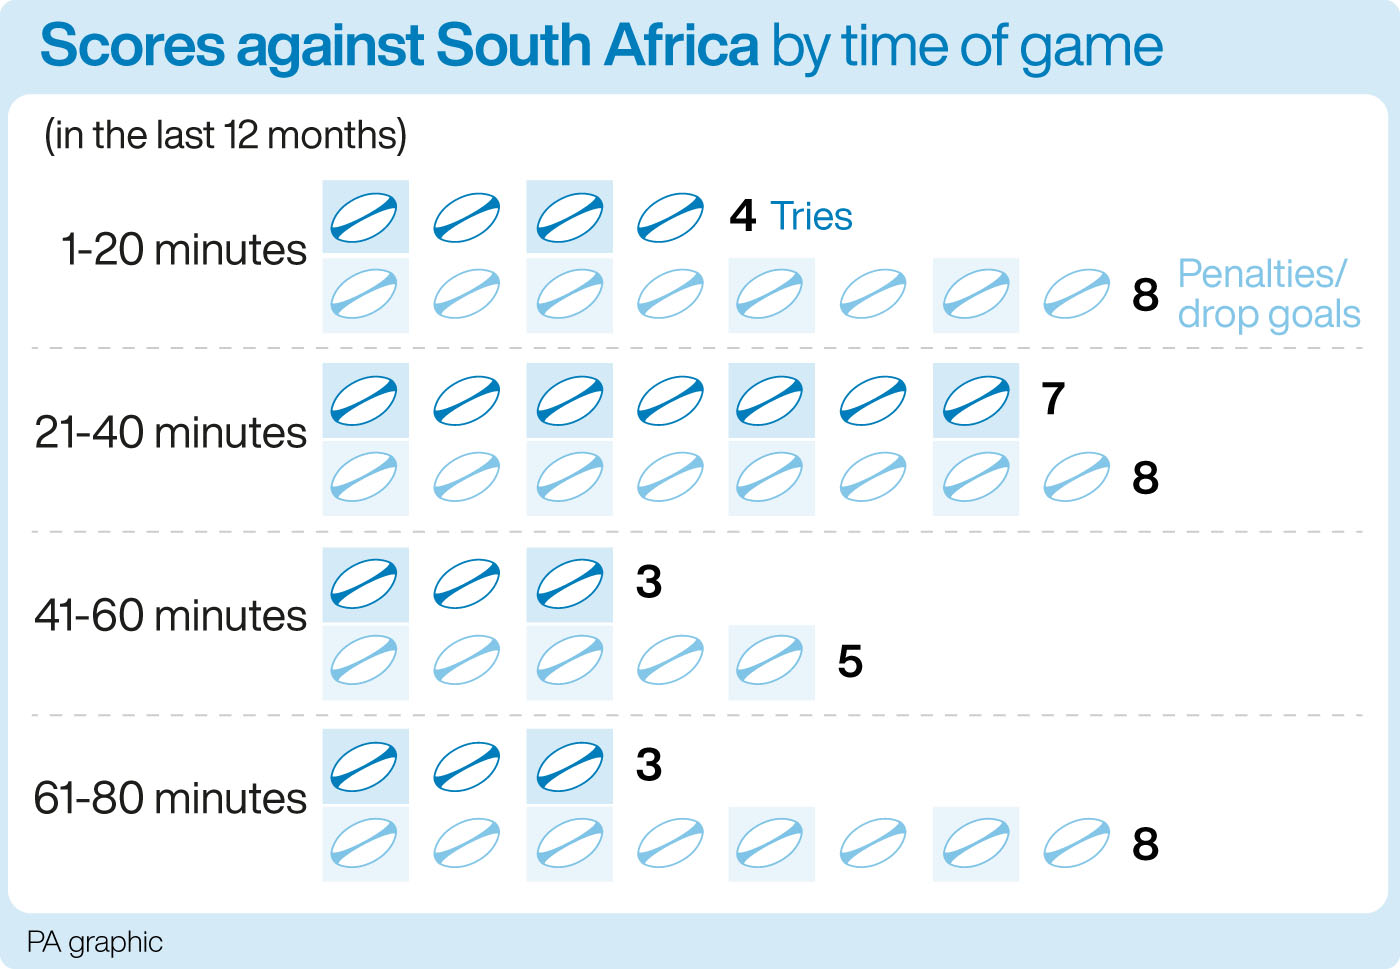 Scores against South Africa, by time of game